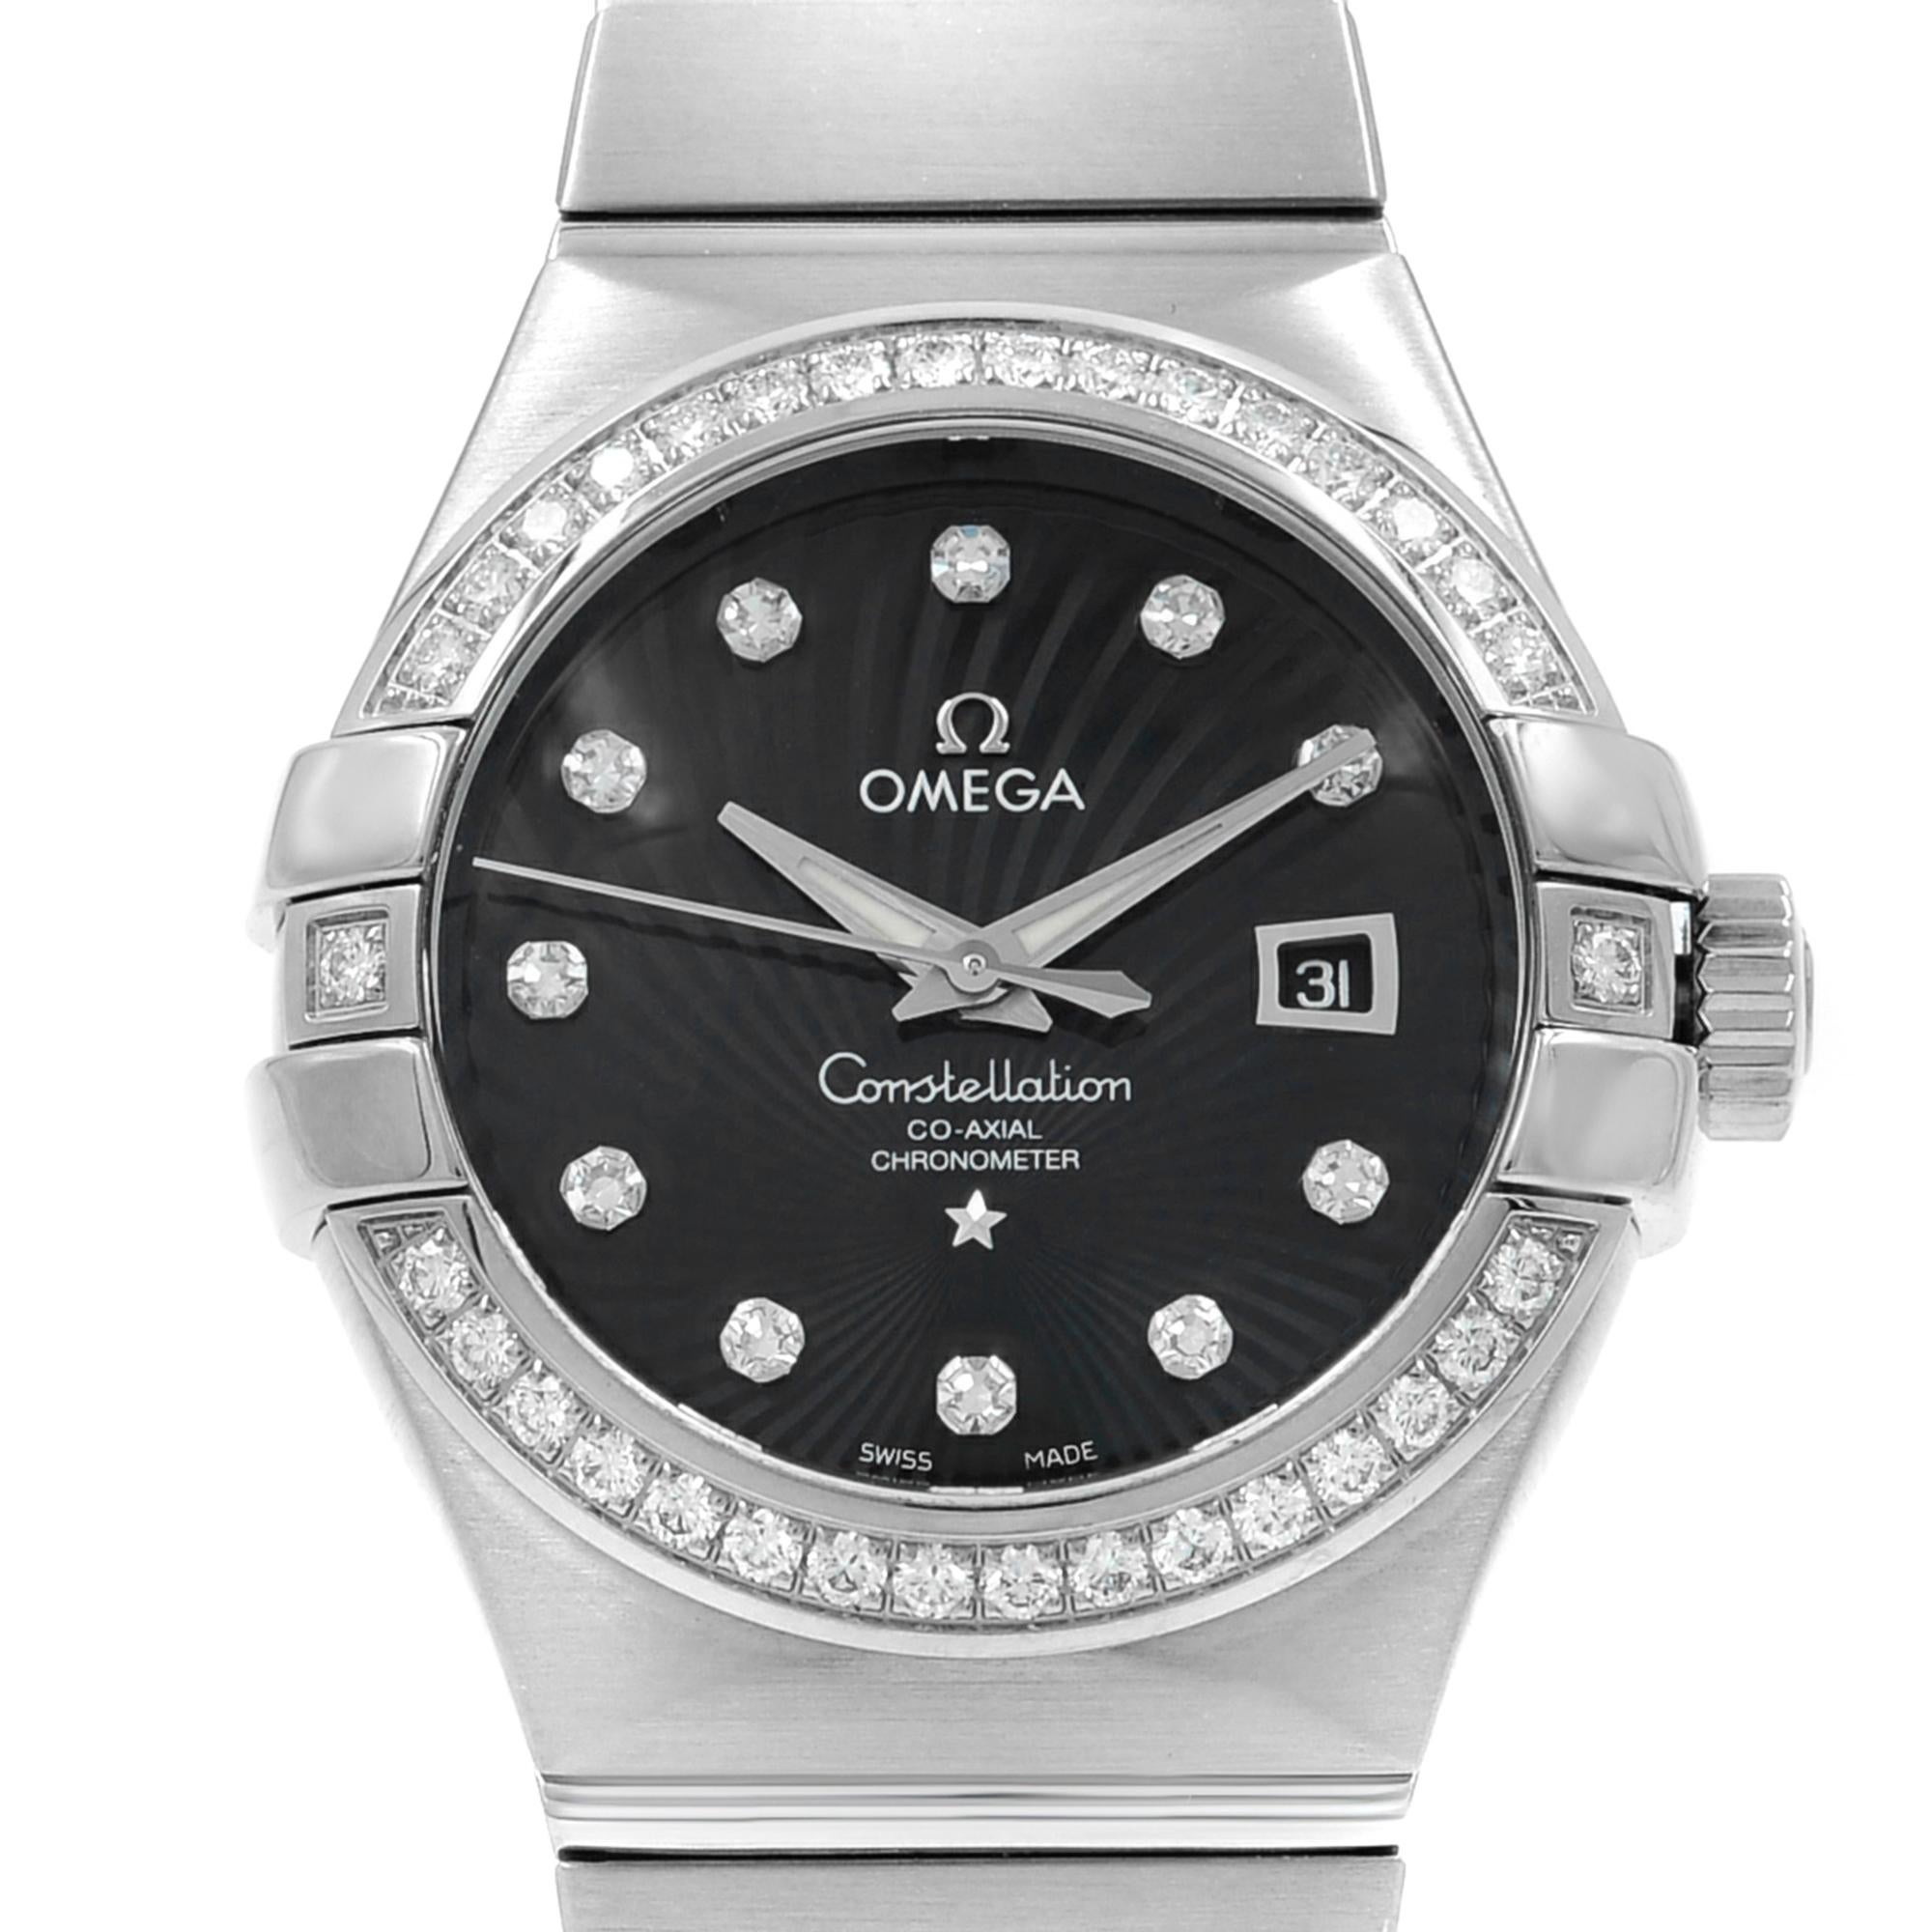 Unworn. Come with the original box but no papers.


Brand and Model Specifics:
Brand: OMEGA
Model: Omega Constellation
Model Number: 123.55.31.20.51.001

Design and Style:
Type: Wristwatch
Style: Luxury
Department: Women
Display: Analog
Dial Color: